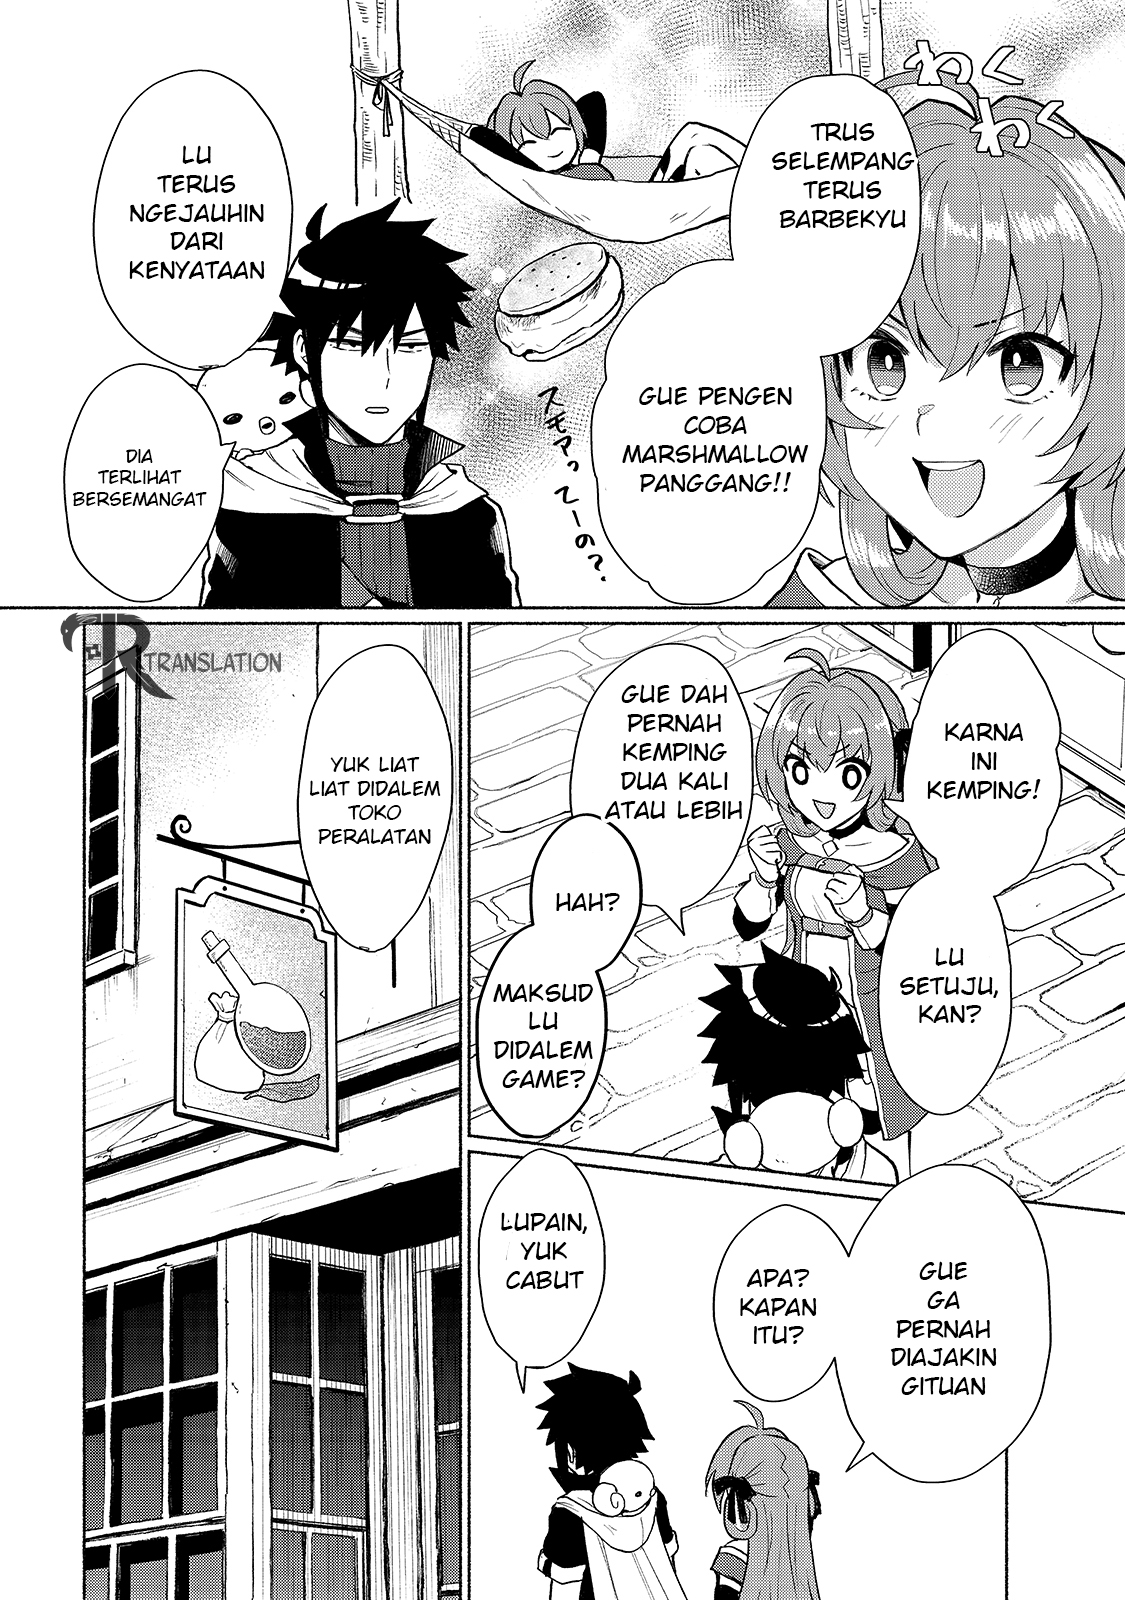 Dilarang COPAS - situs resmi www.mangacanblog.com - Komik when i was reincarnated in another world i was a heroine and he was a hero 005 - chapter 5 6 Indonesia when i was reincarnated in another world i was a heroine and he was a hero 005 - chapter 5 Terbaru 8|Baca Manga Komik Indonesia|Mangacan